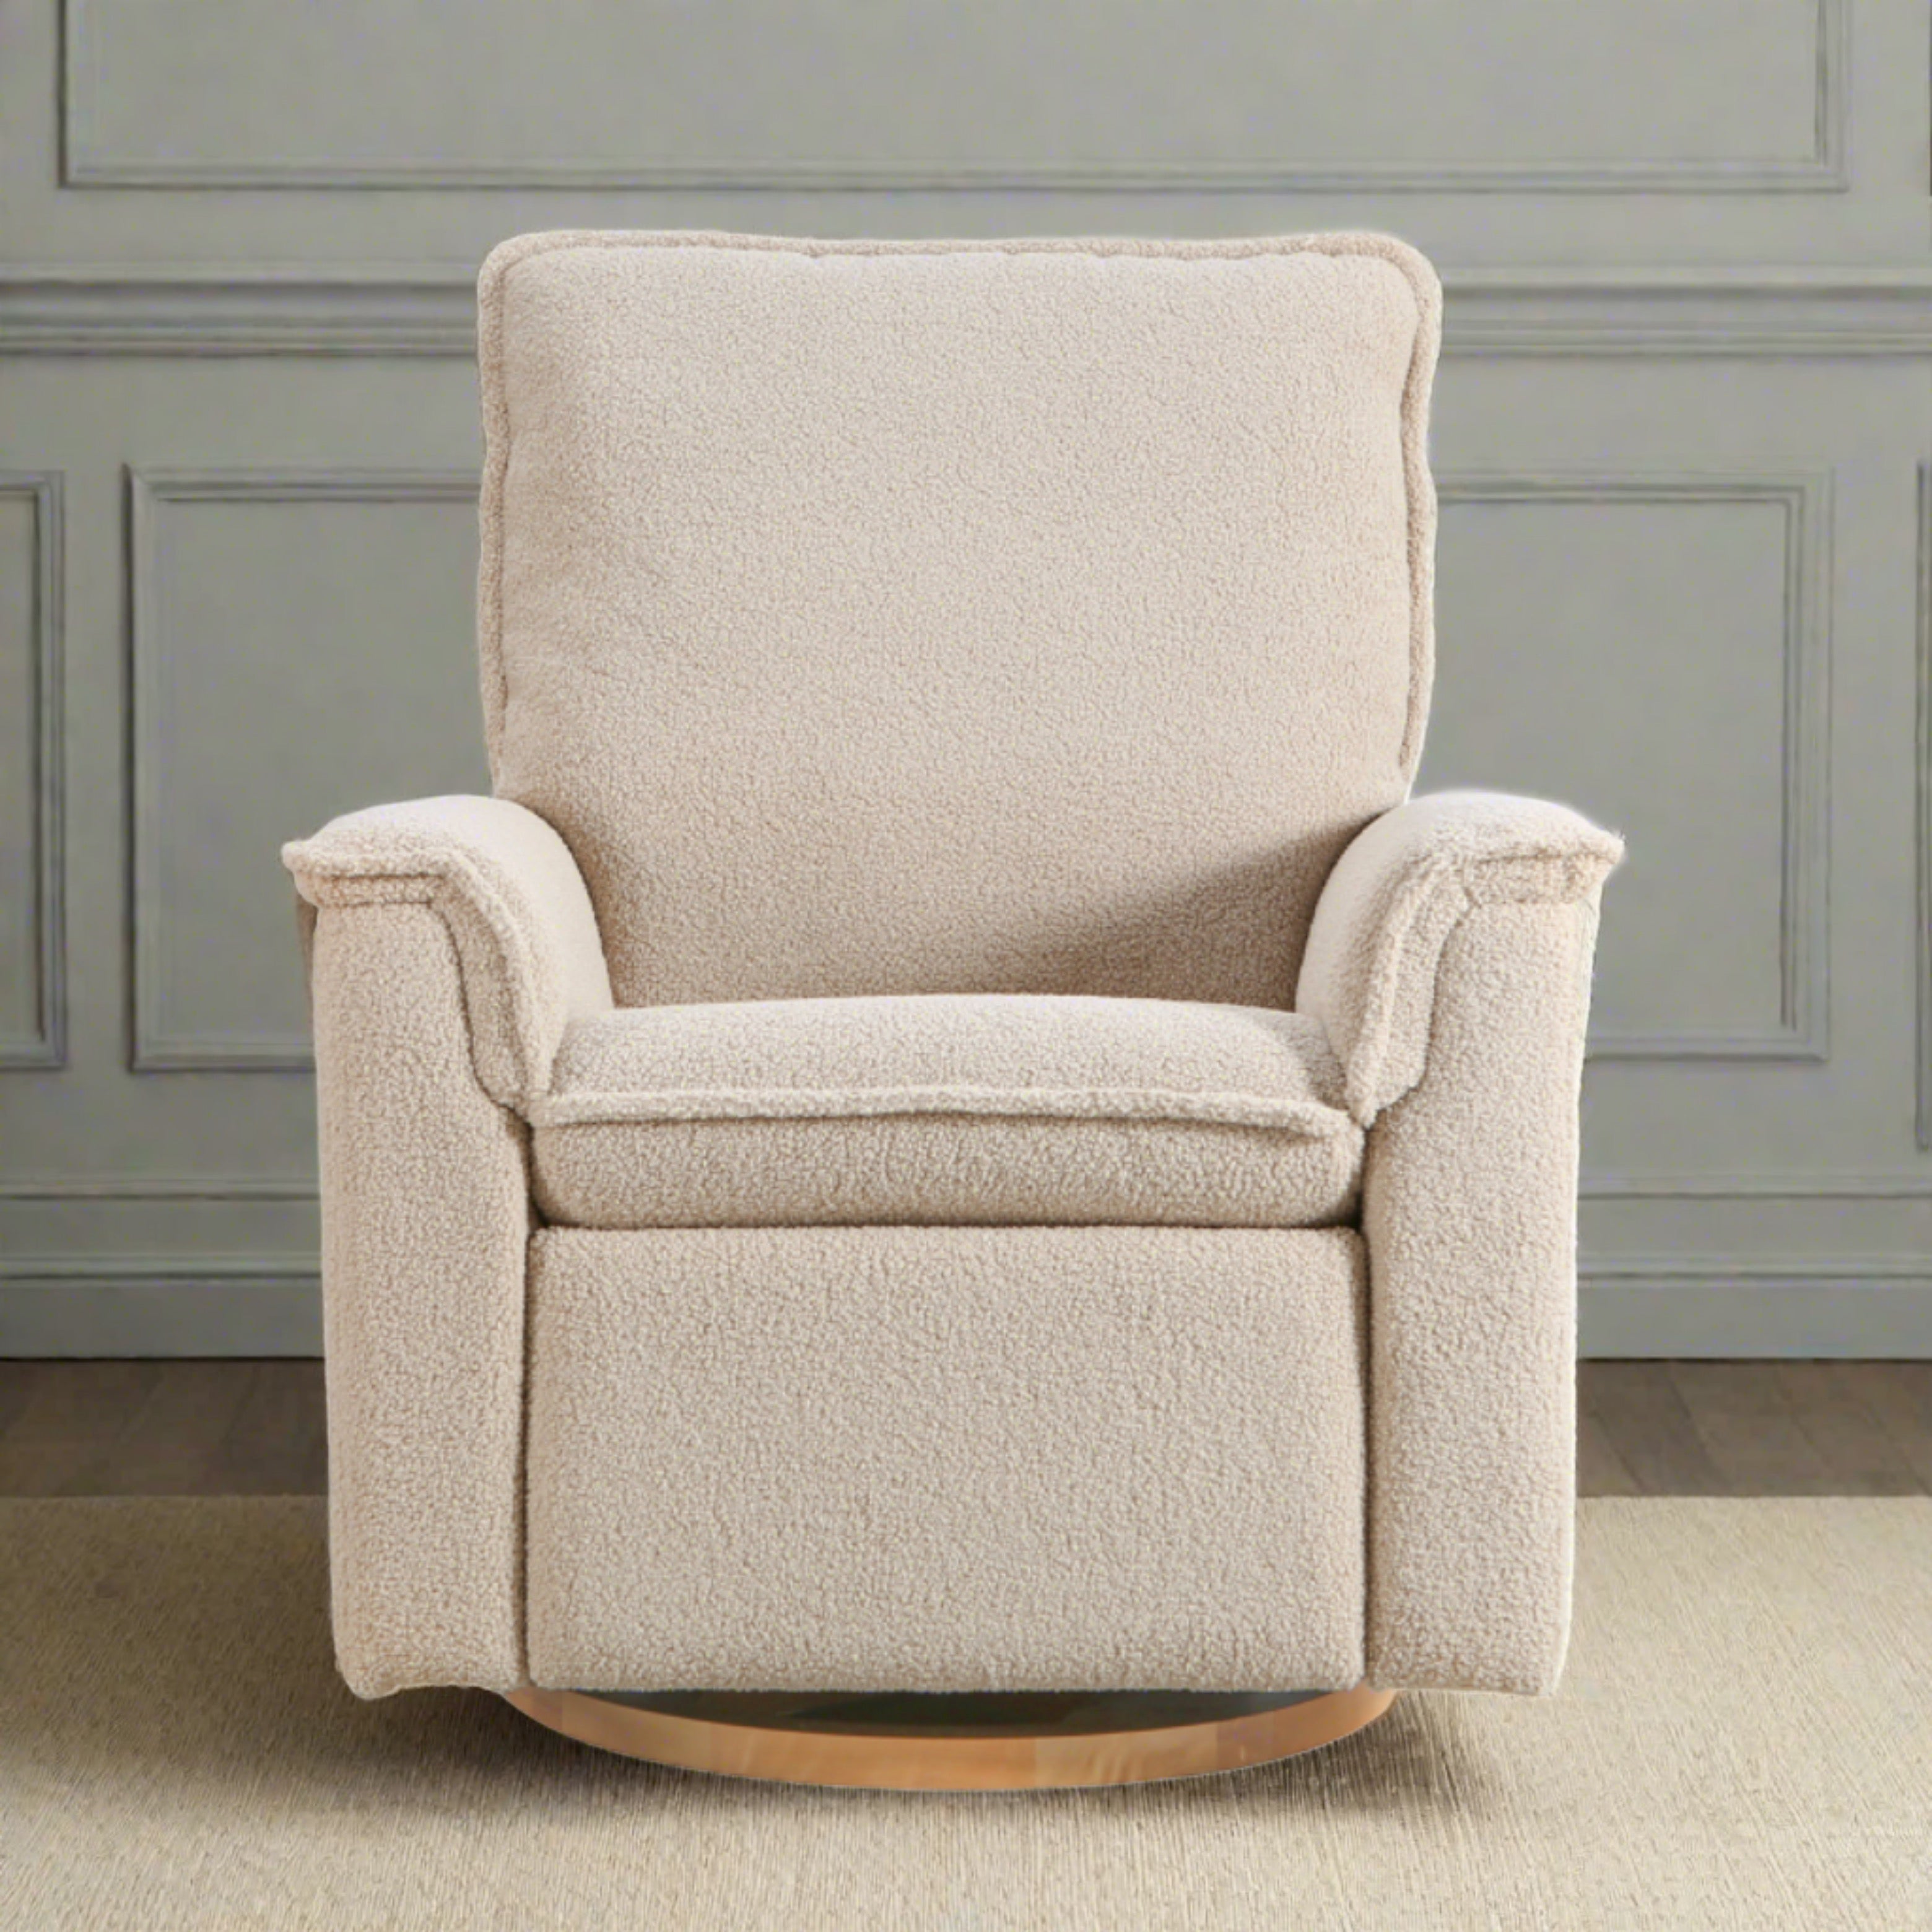 Baby Appleseed | Anza Recliner